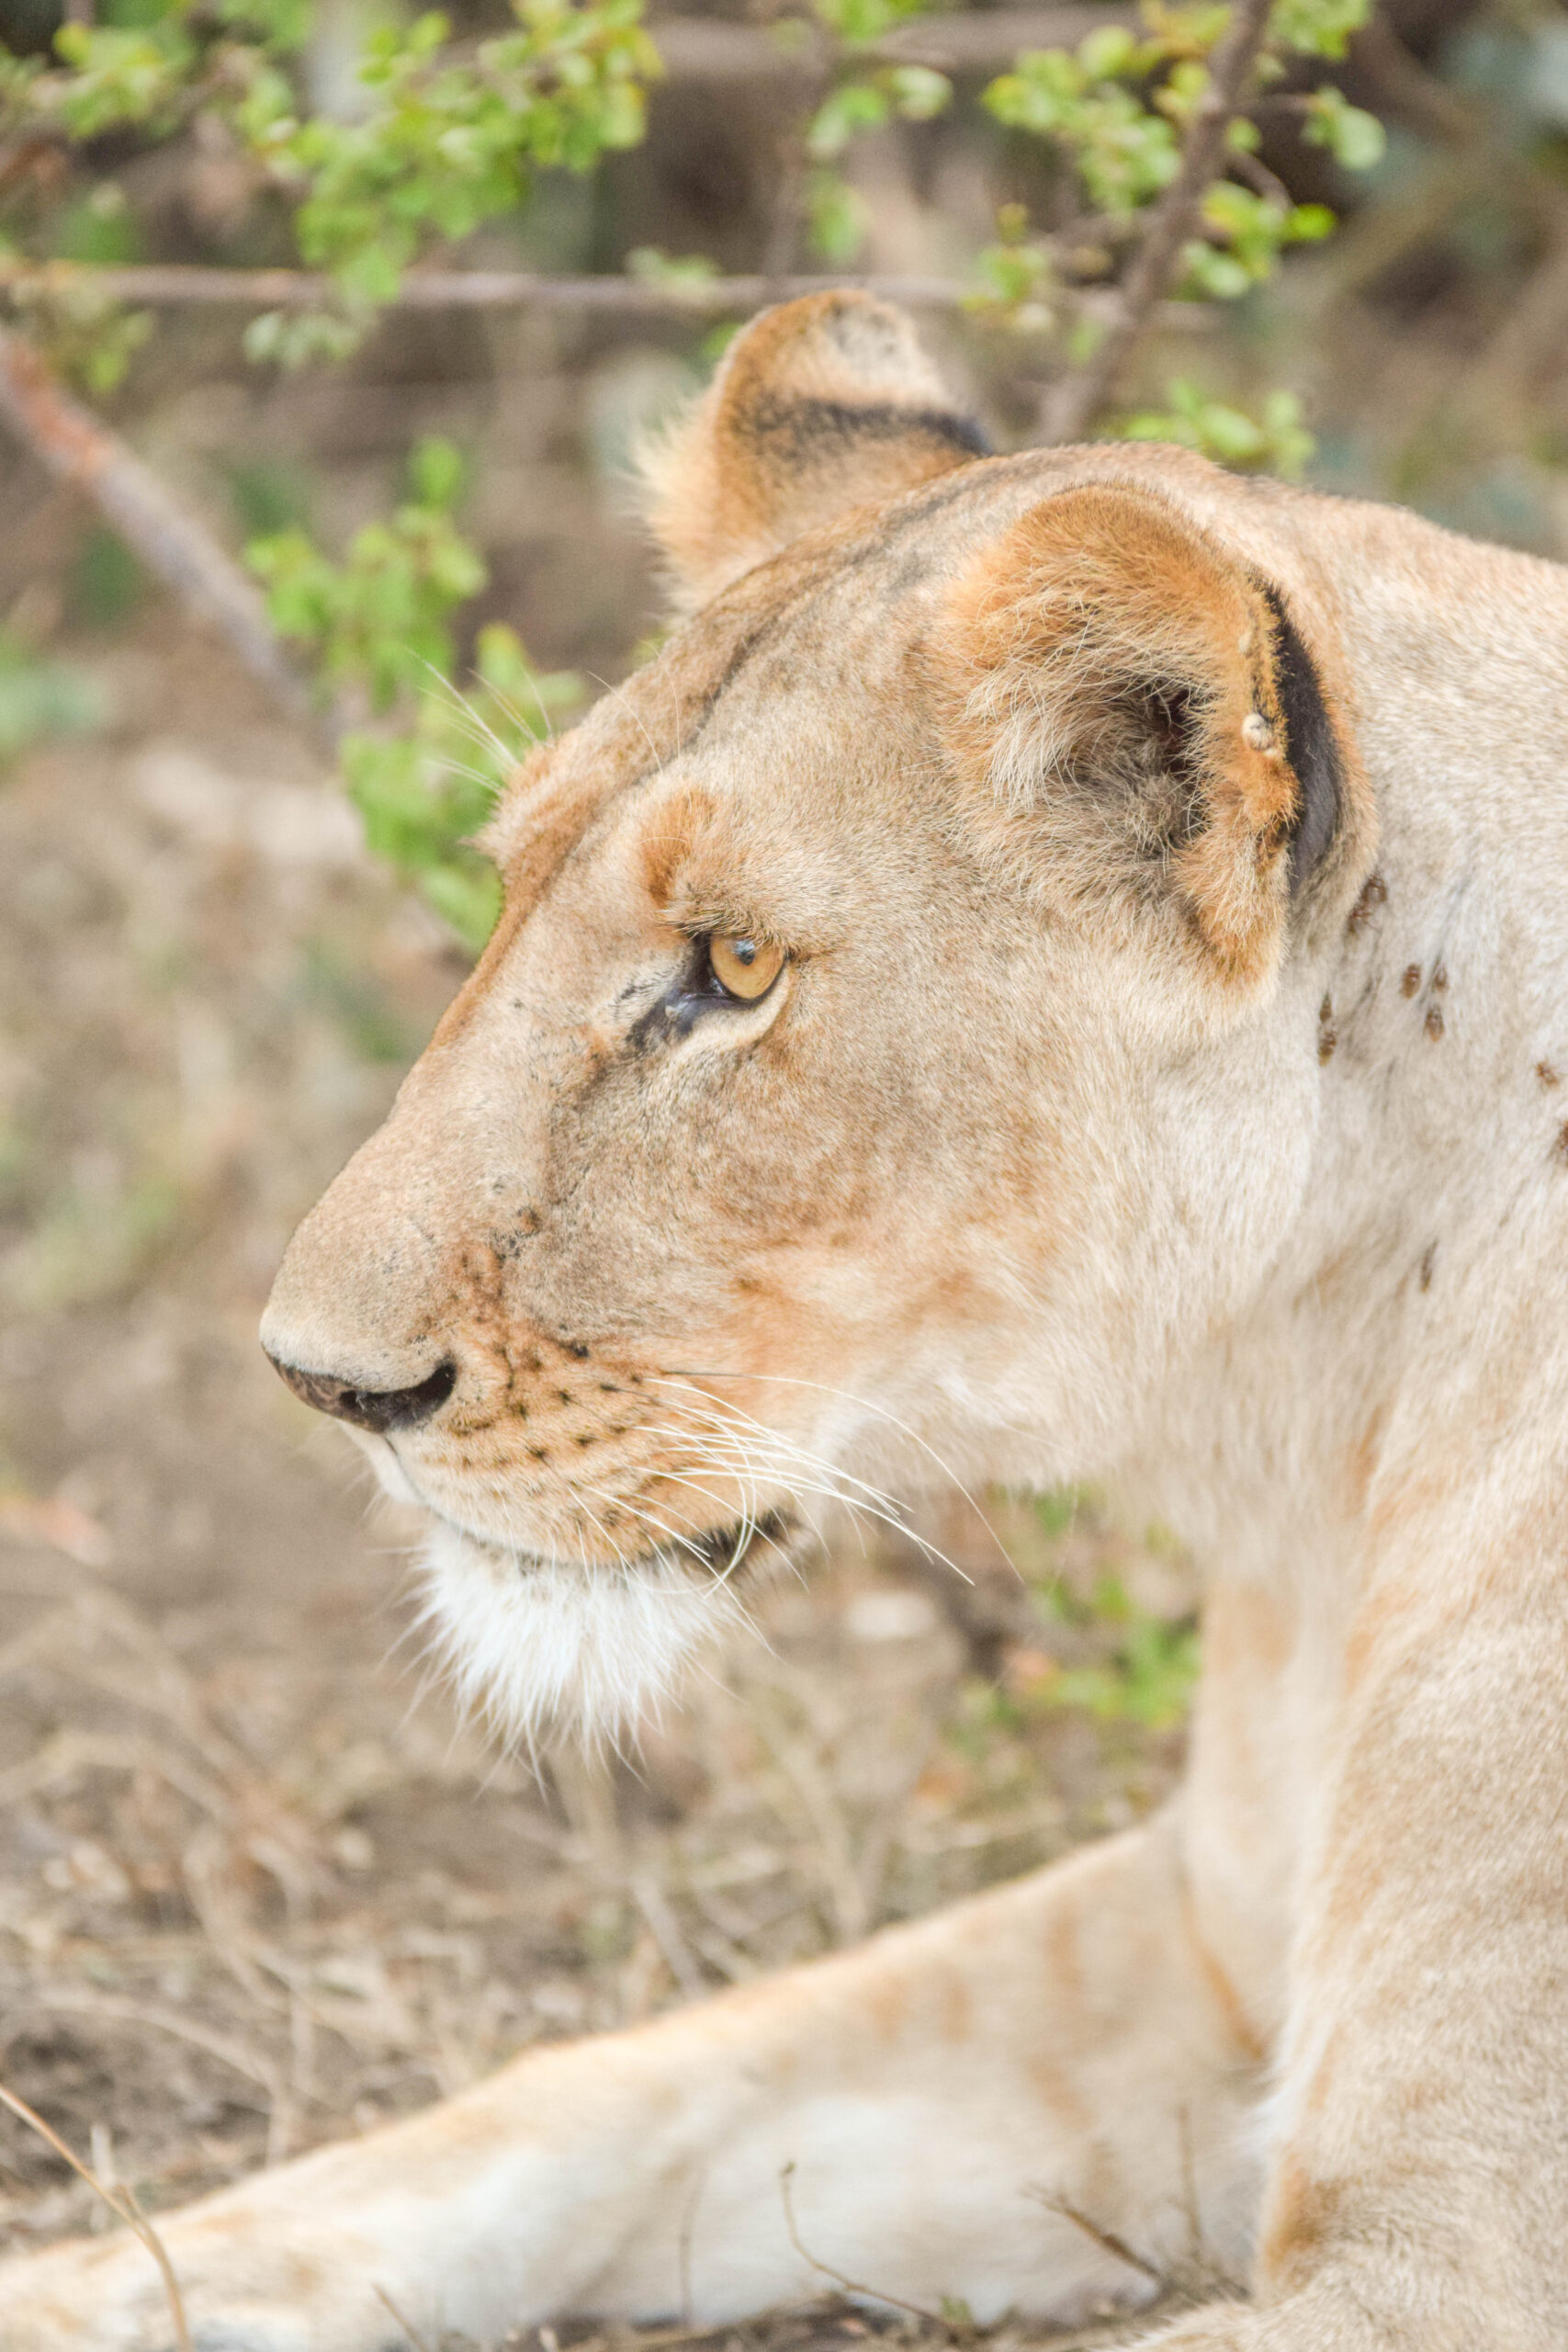 Lions In Kenya - Dreaming after a safari in Kenya? Here is my photo diary of the majestic lions (and lionesses) of Kenya! | Kenya Travel - African Wildlife - Safari Photography - Kenyan Wildlife